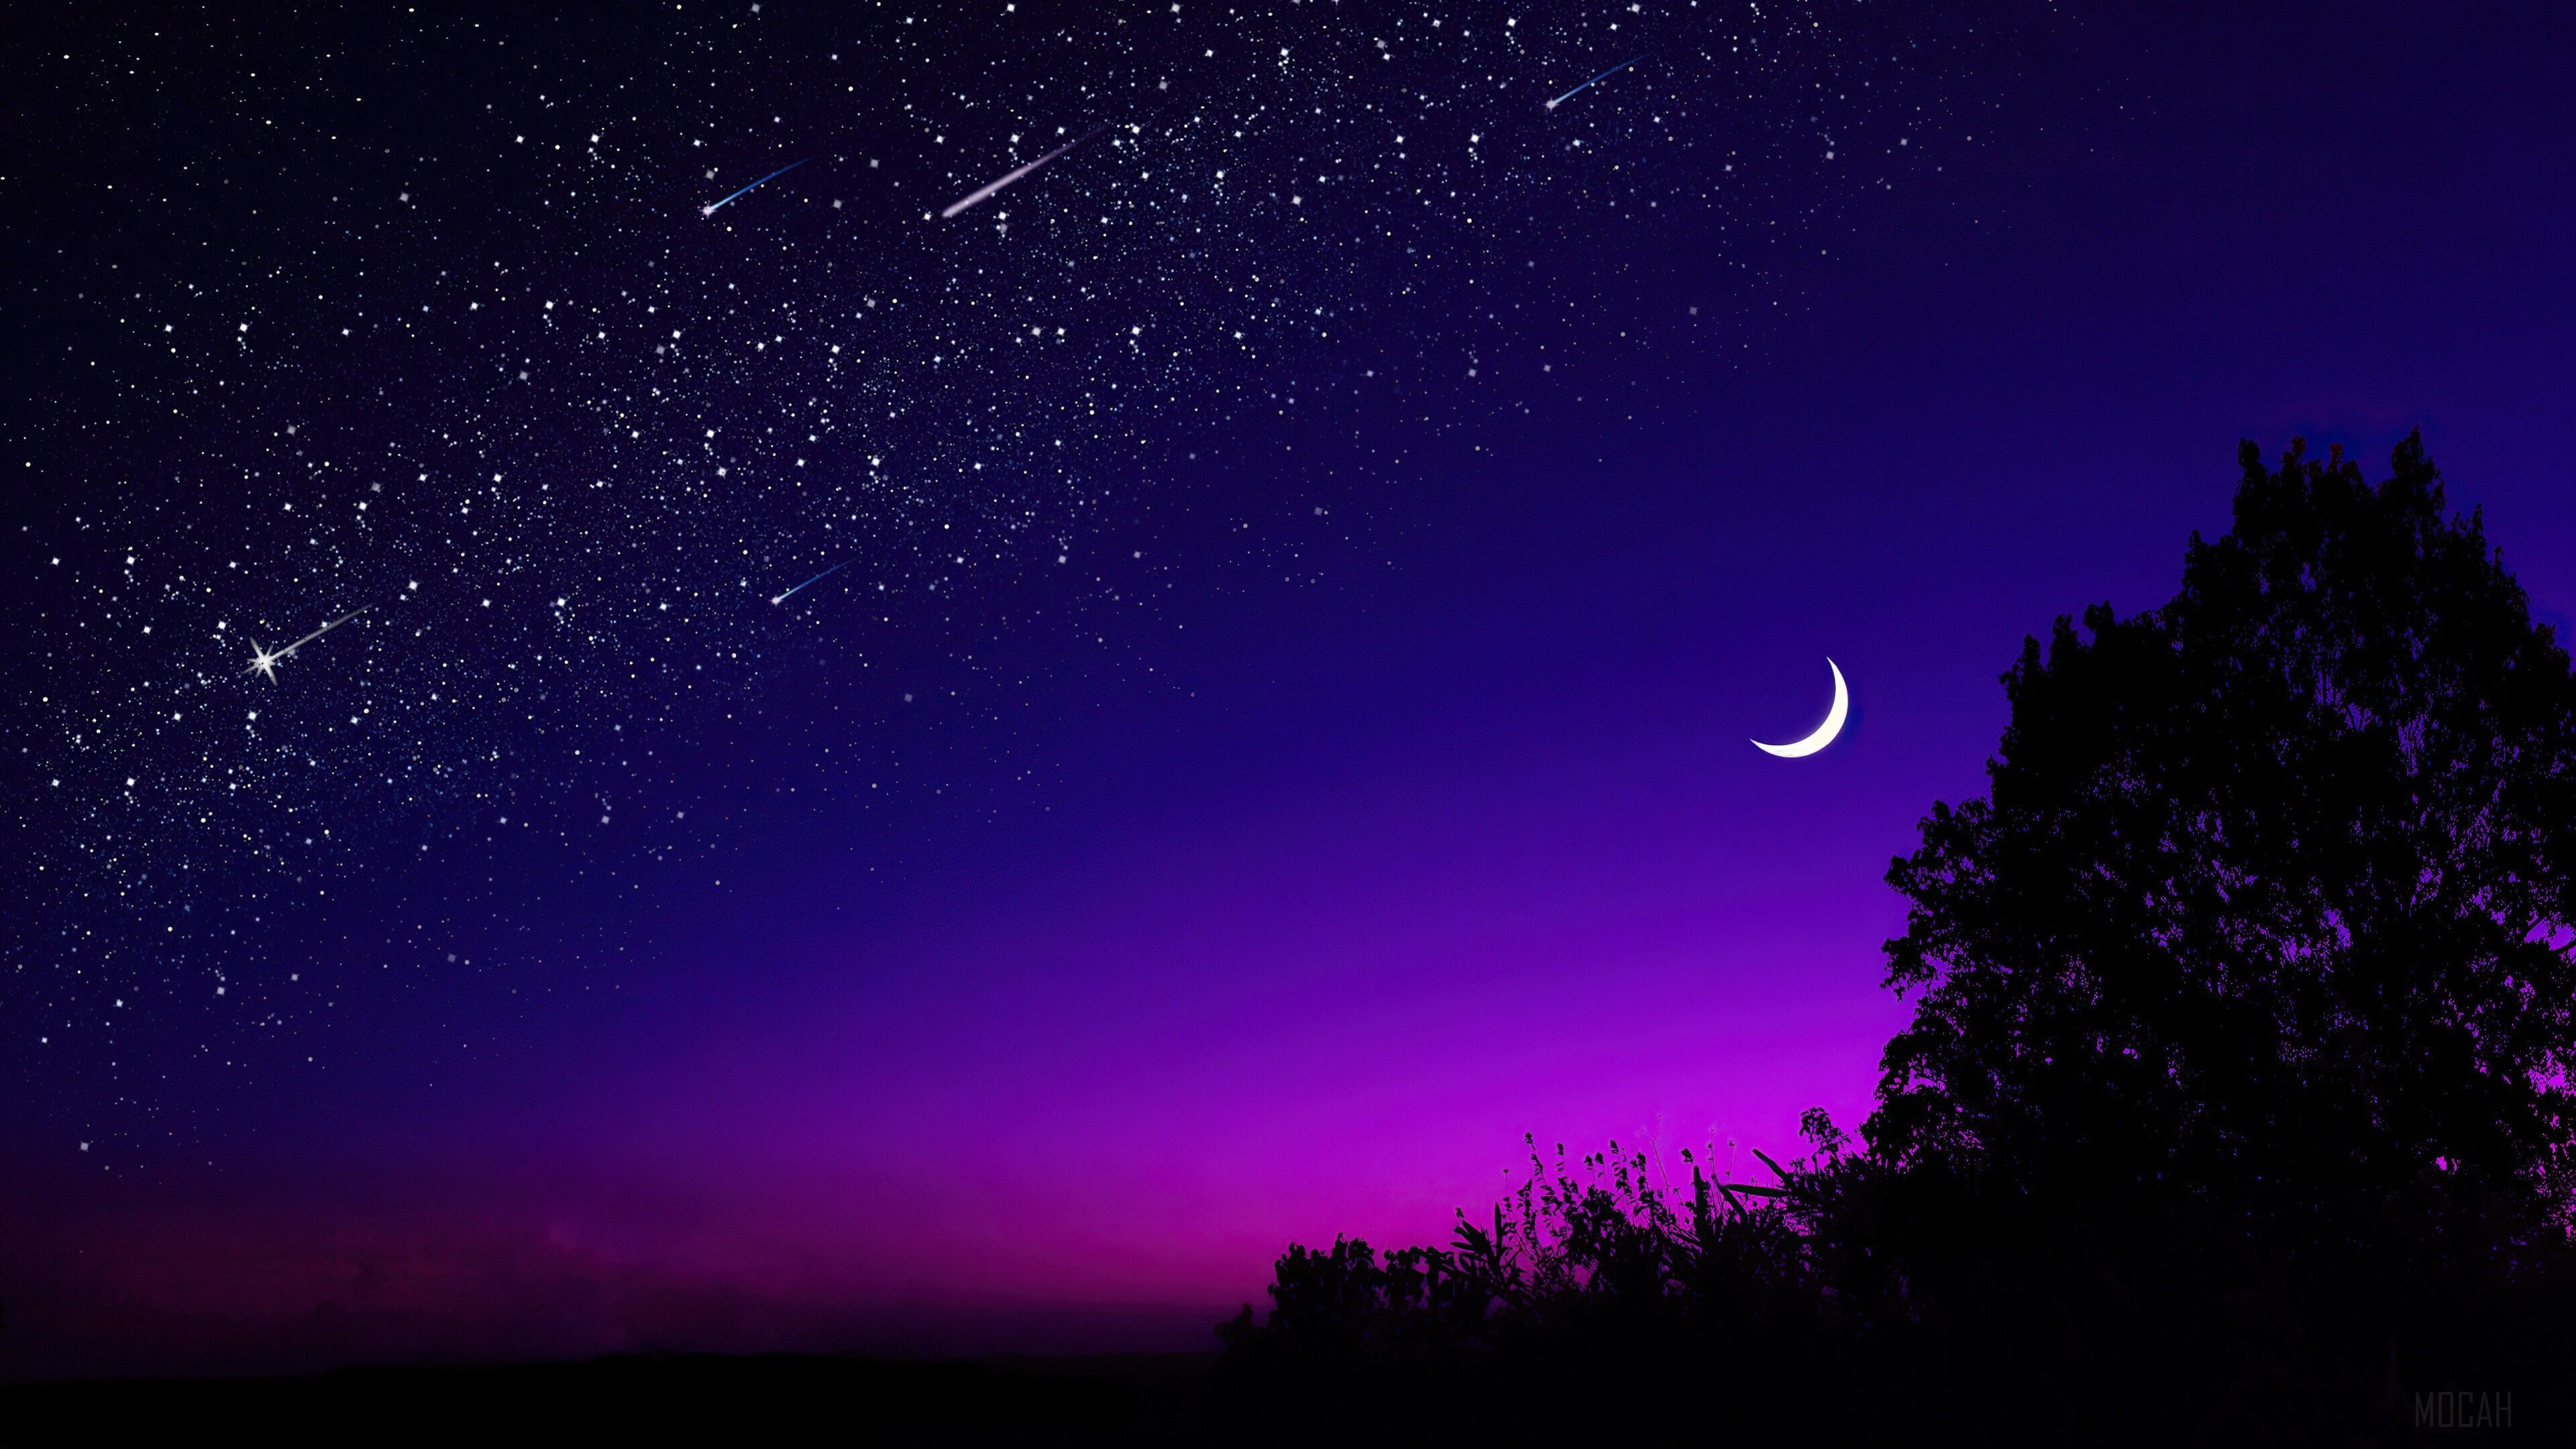 Night sky with stars and a crescent moon - Night, moon